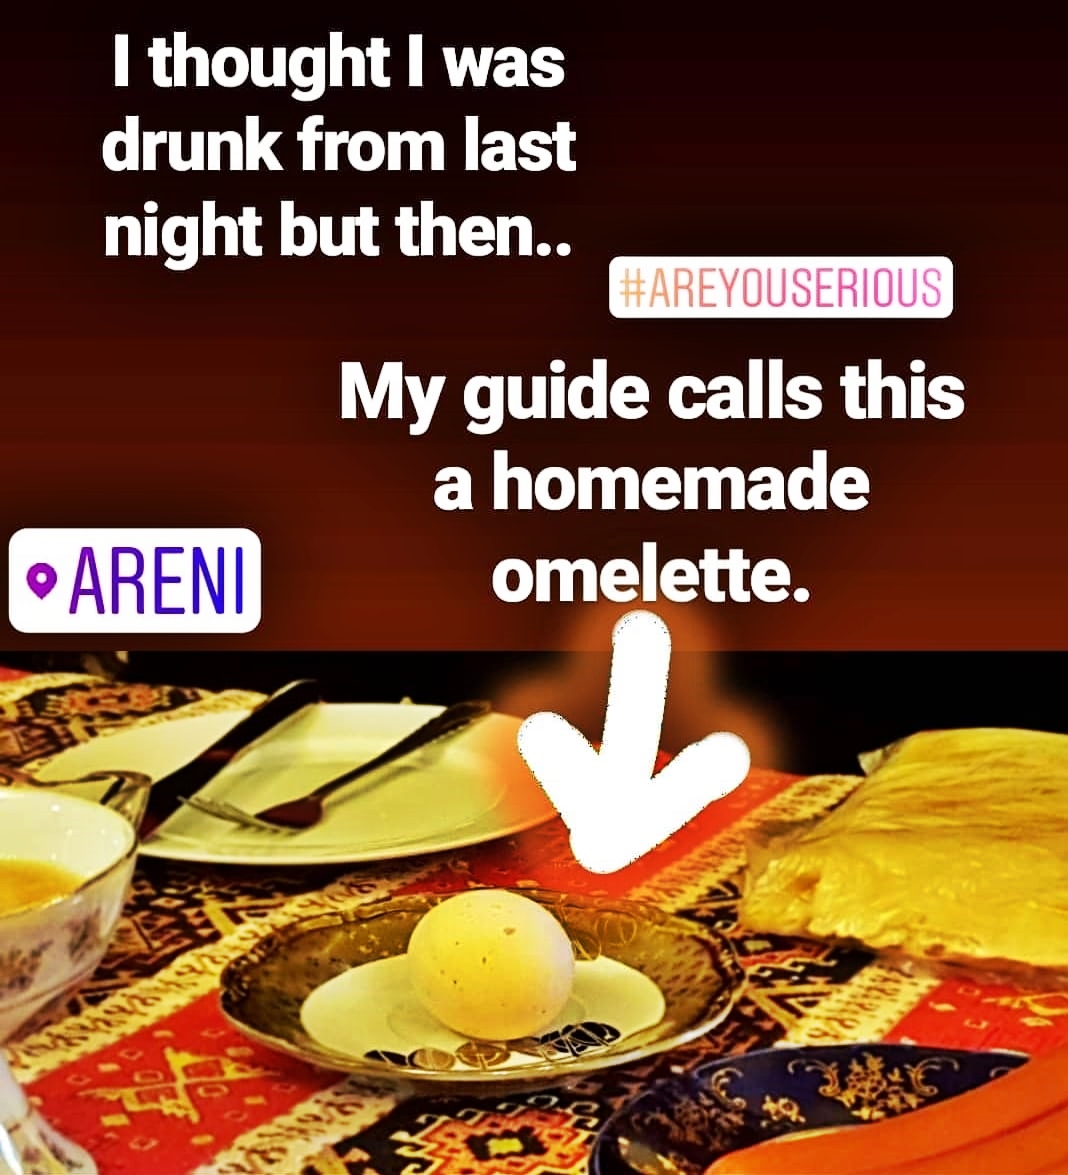 When a raw egg in a shell was served to me as an "omlette" in Areni